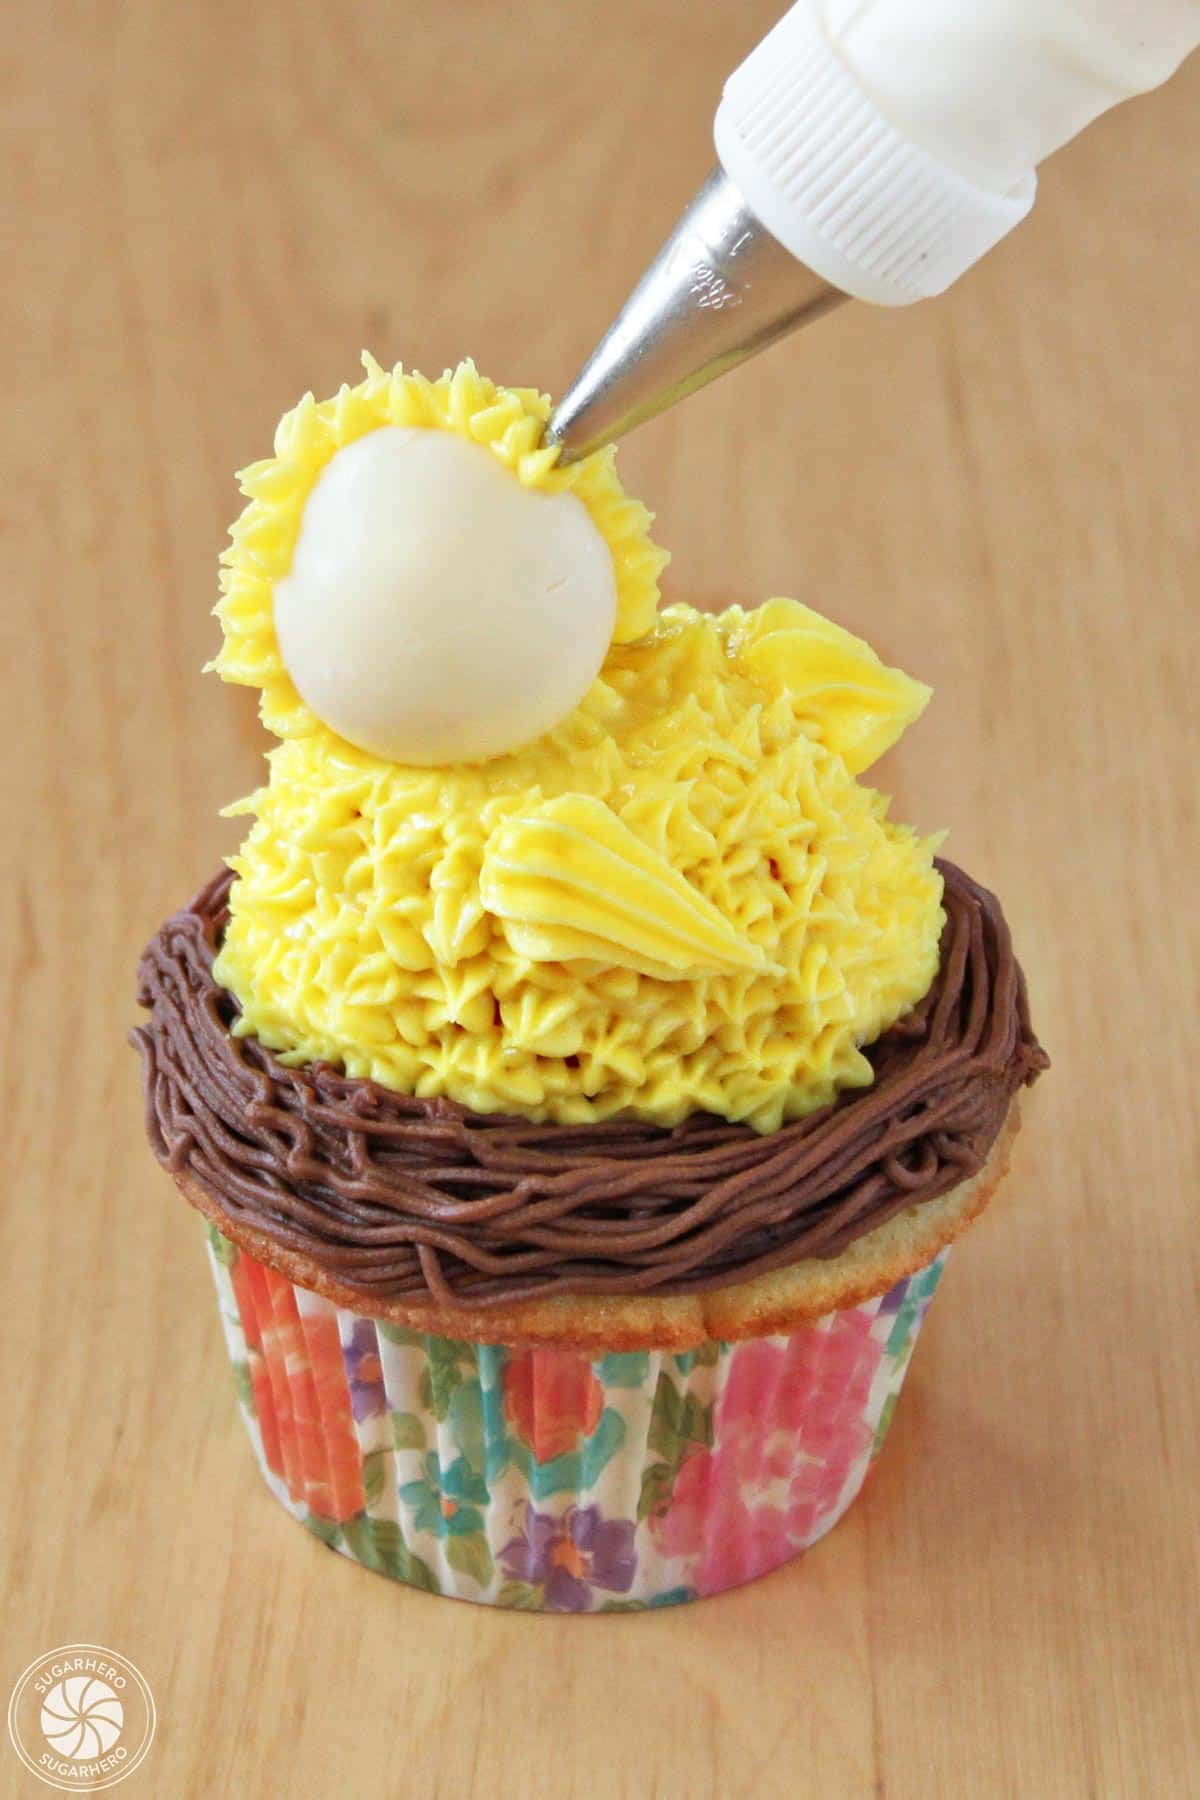 Covering a chick's head with yellow buttercream.